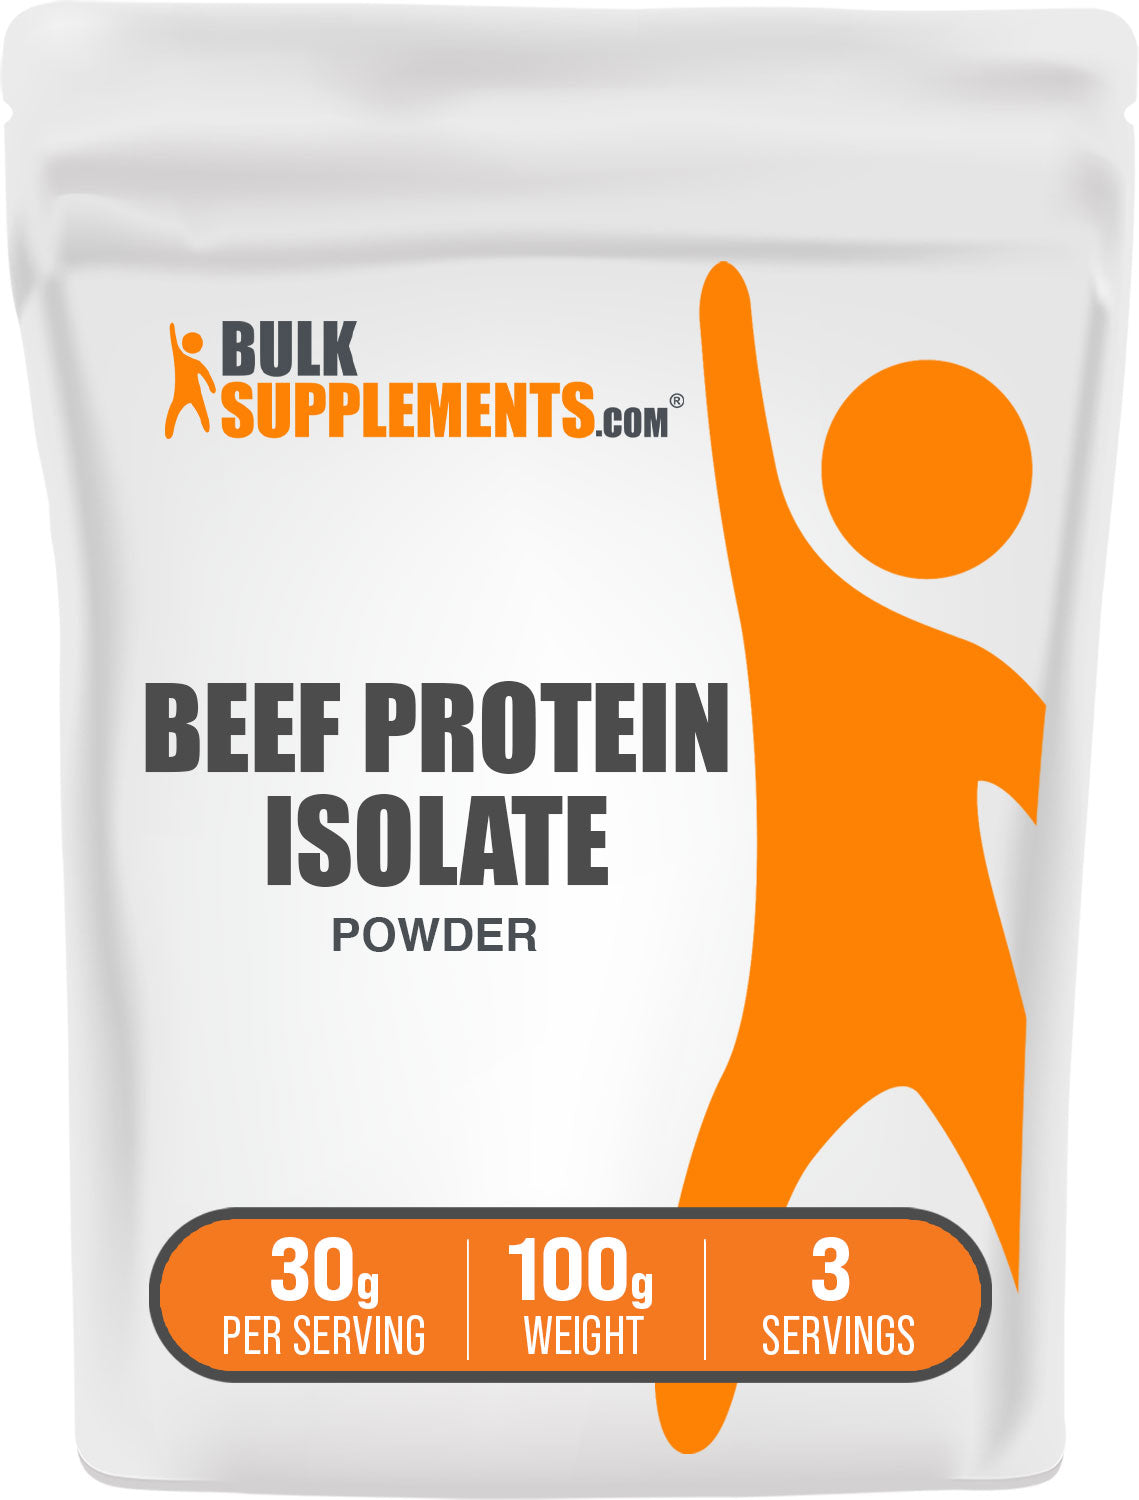 BulkSupplements.com Beef Protein Isolate powder bag 100g